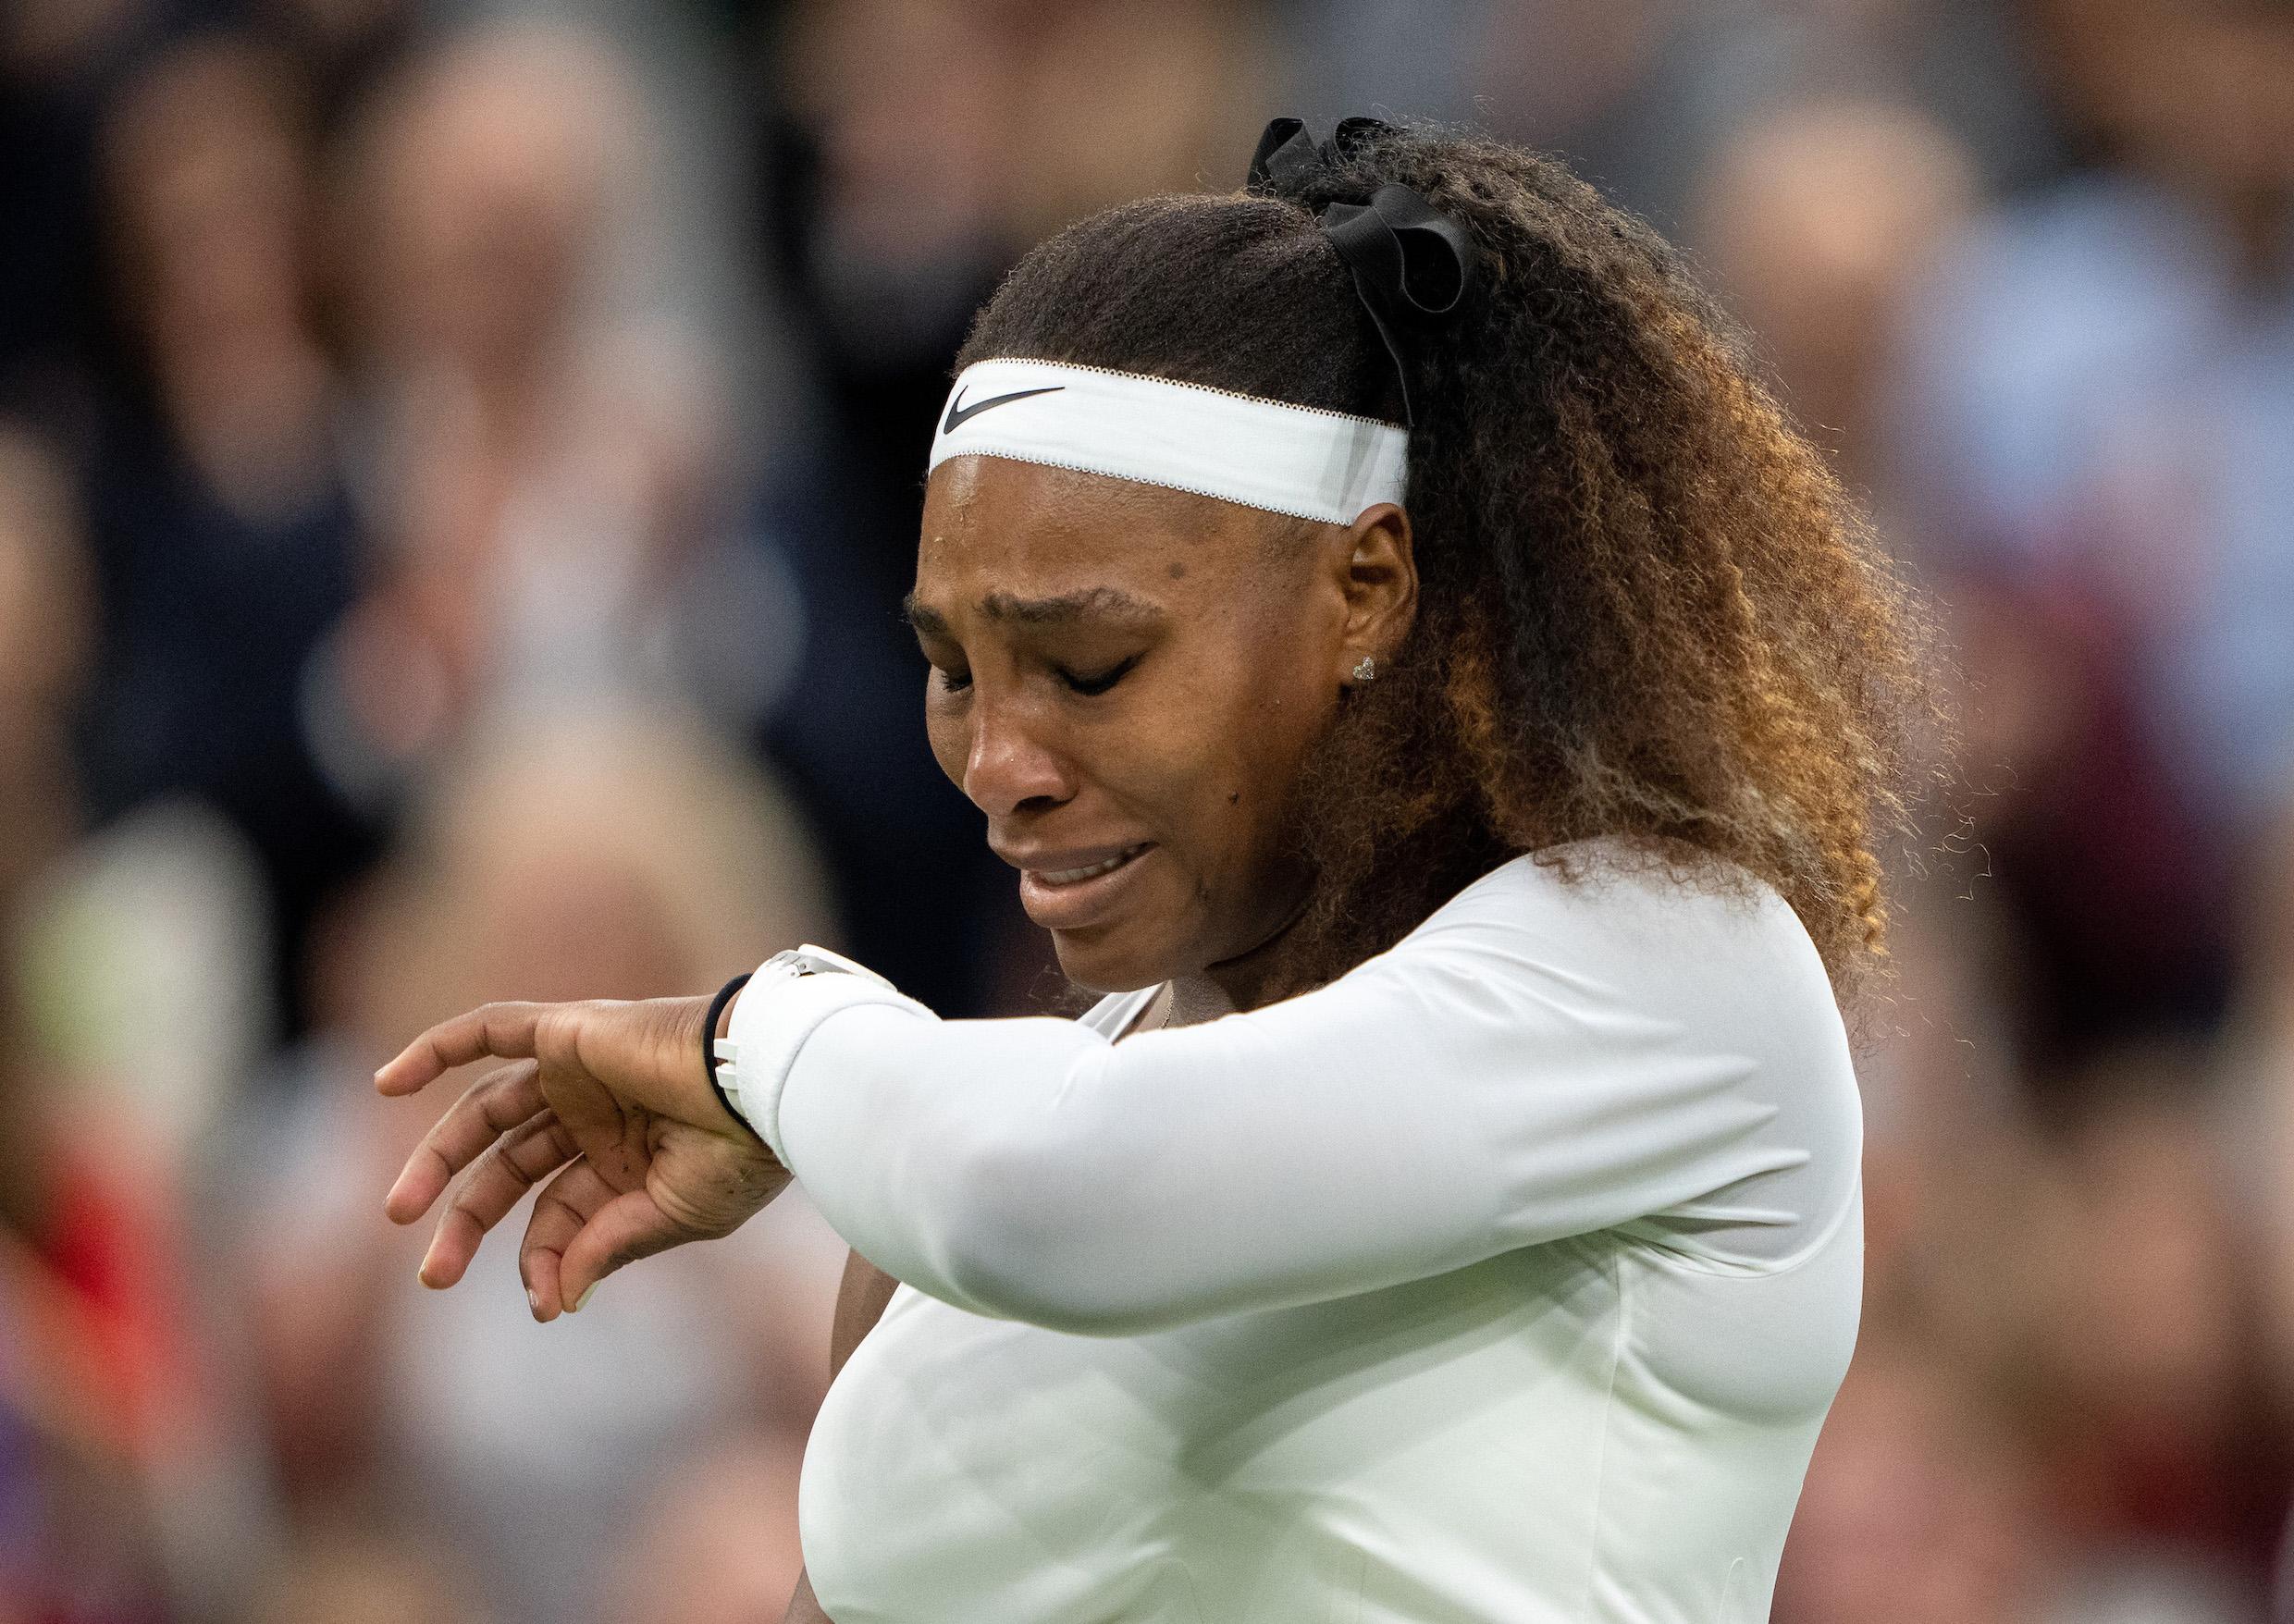 Wimbledon ends in tears for injured Serena GMA News Online